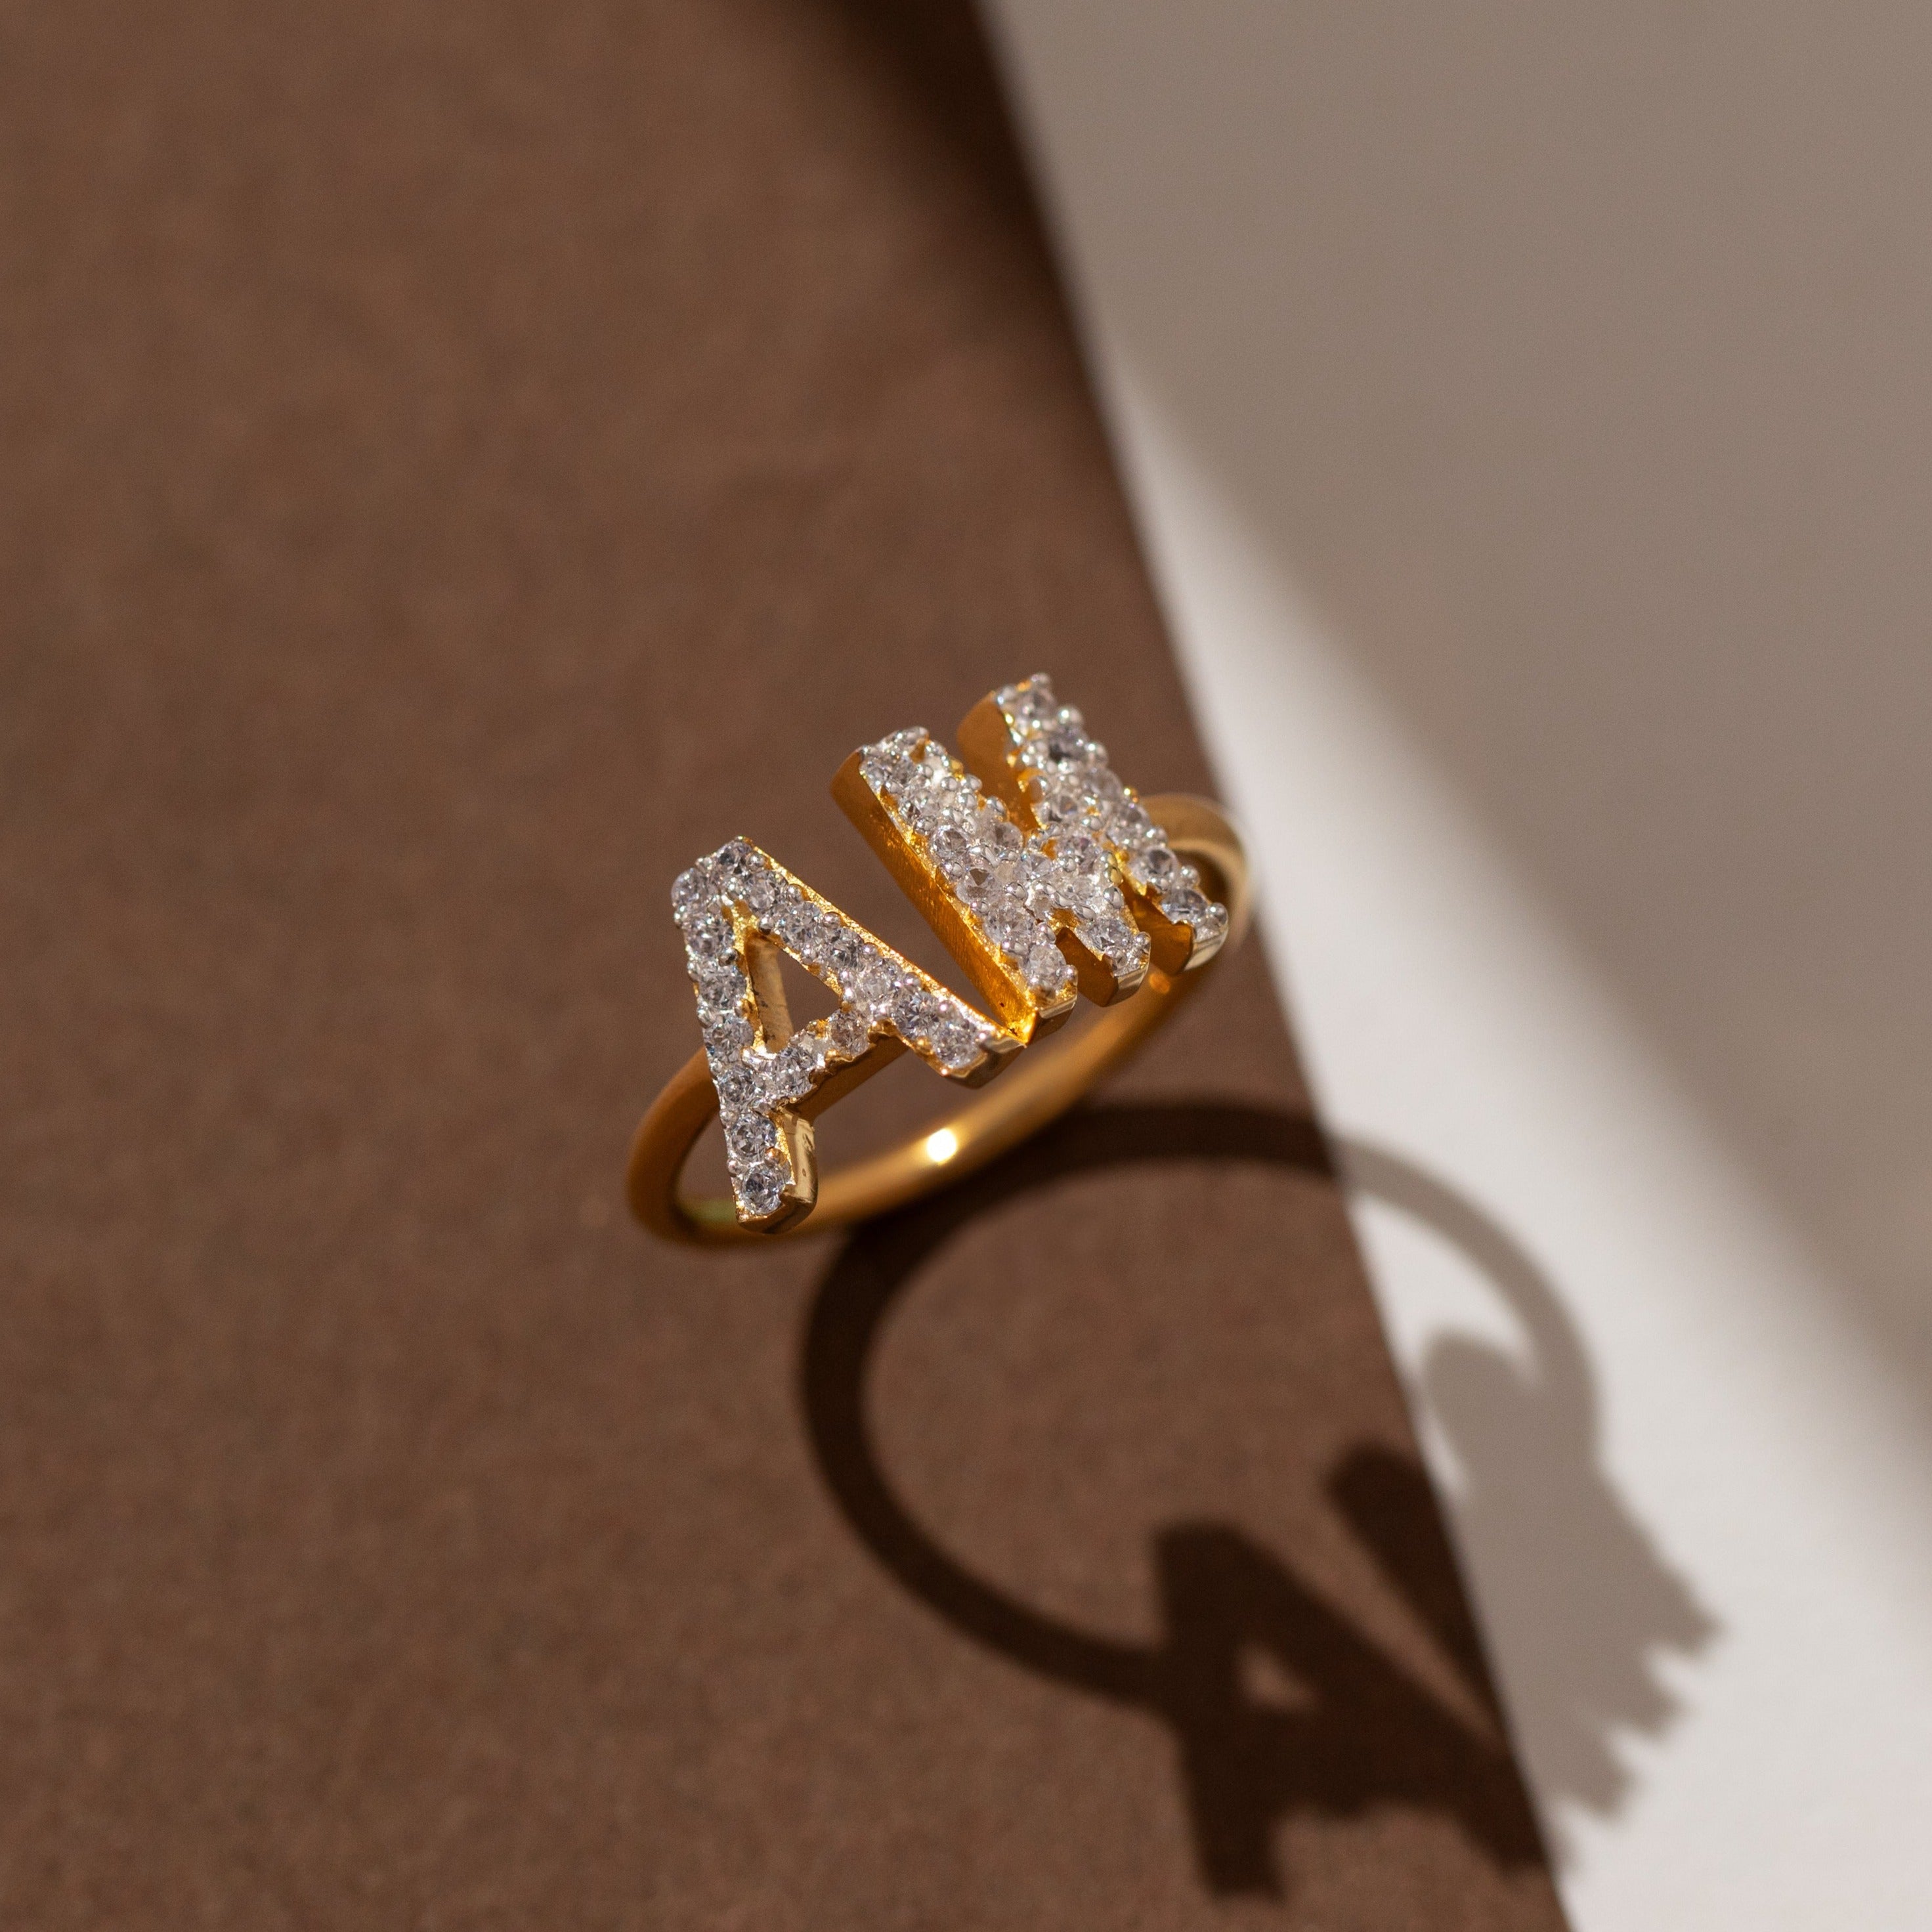 The Simple Personalized Ring |